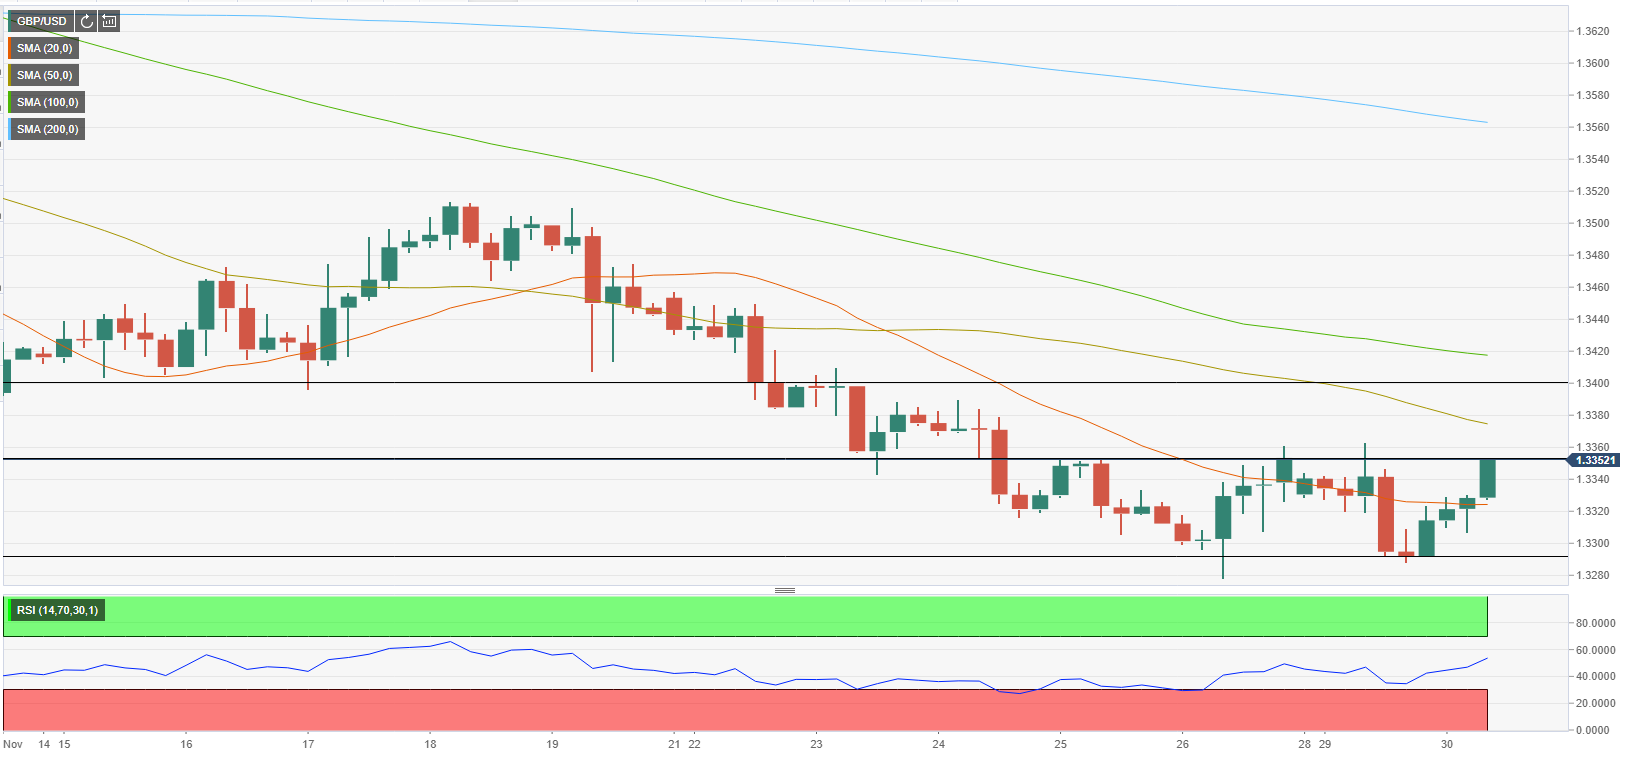 Pound Sterling Price News and Forecast: GBP/USD room for extra decline below 1.3300 - FXStreet